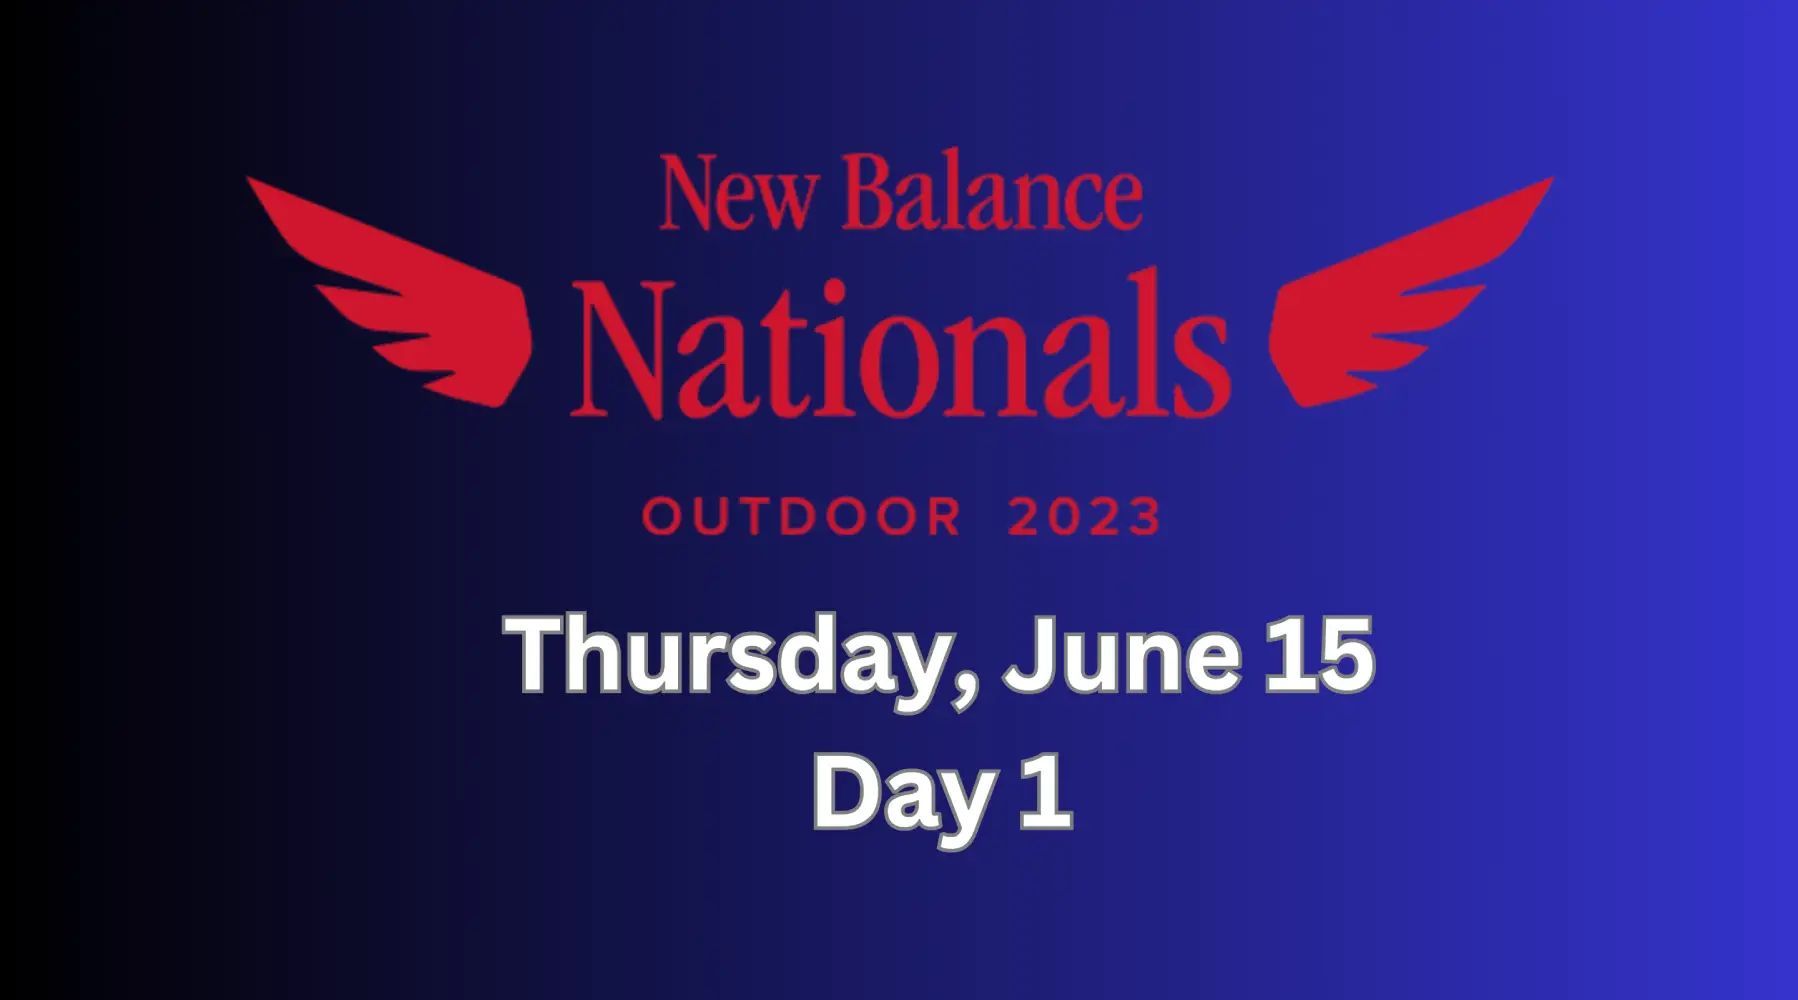 Day 1: 2023 New Balance Nationals Outdoor schedule, live results